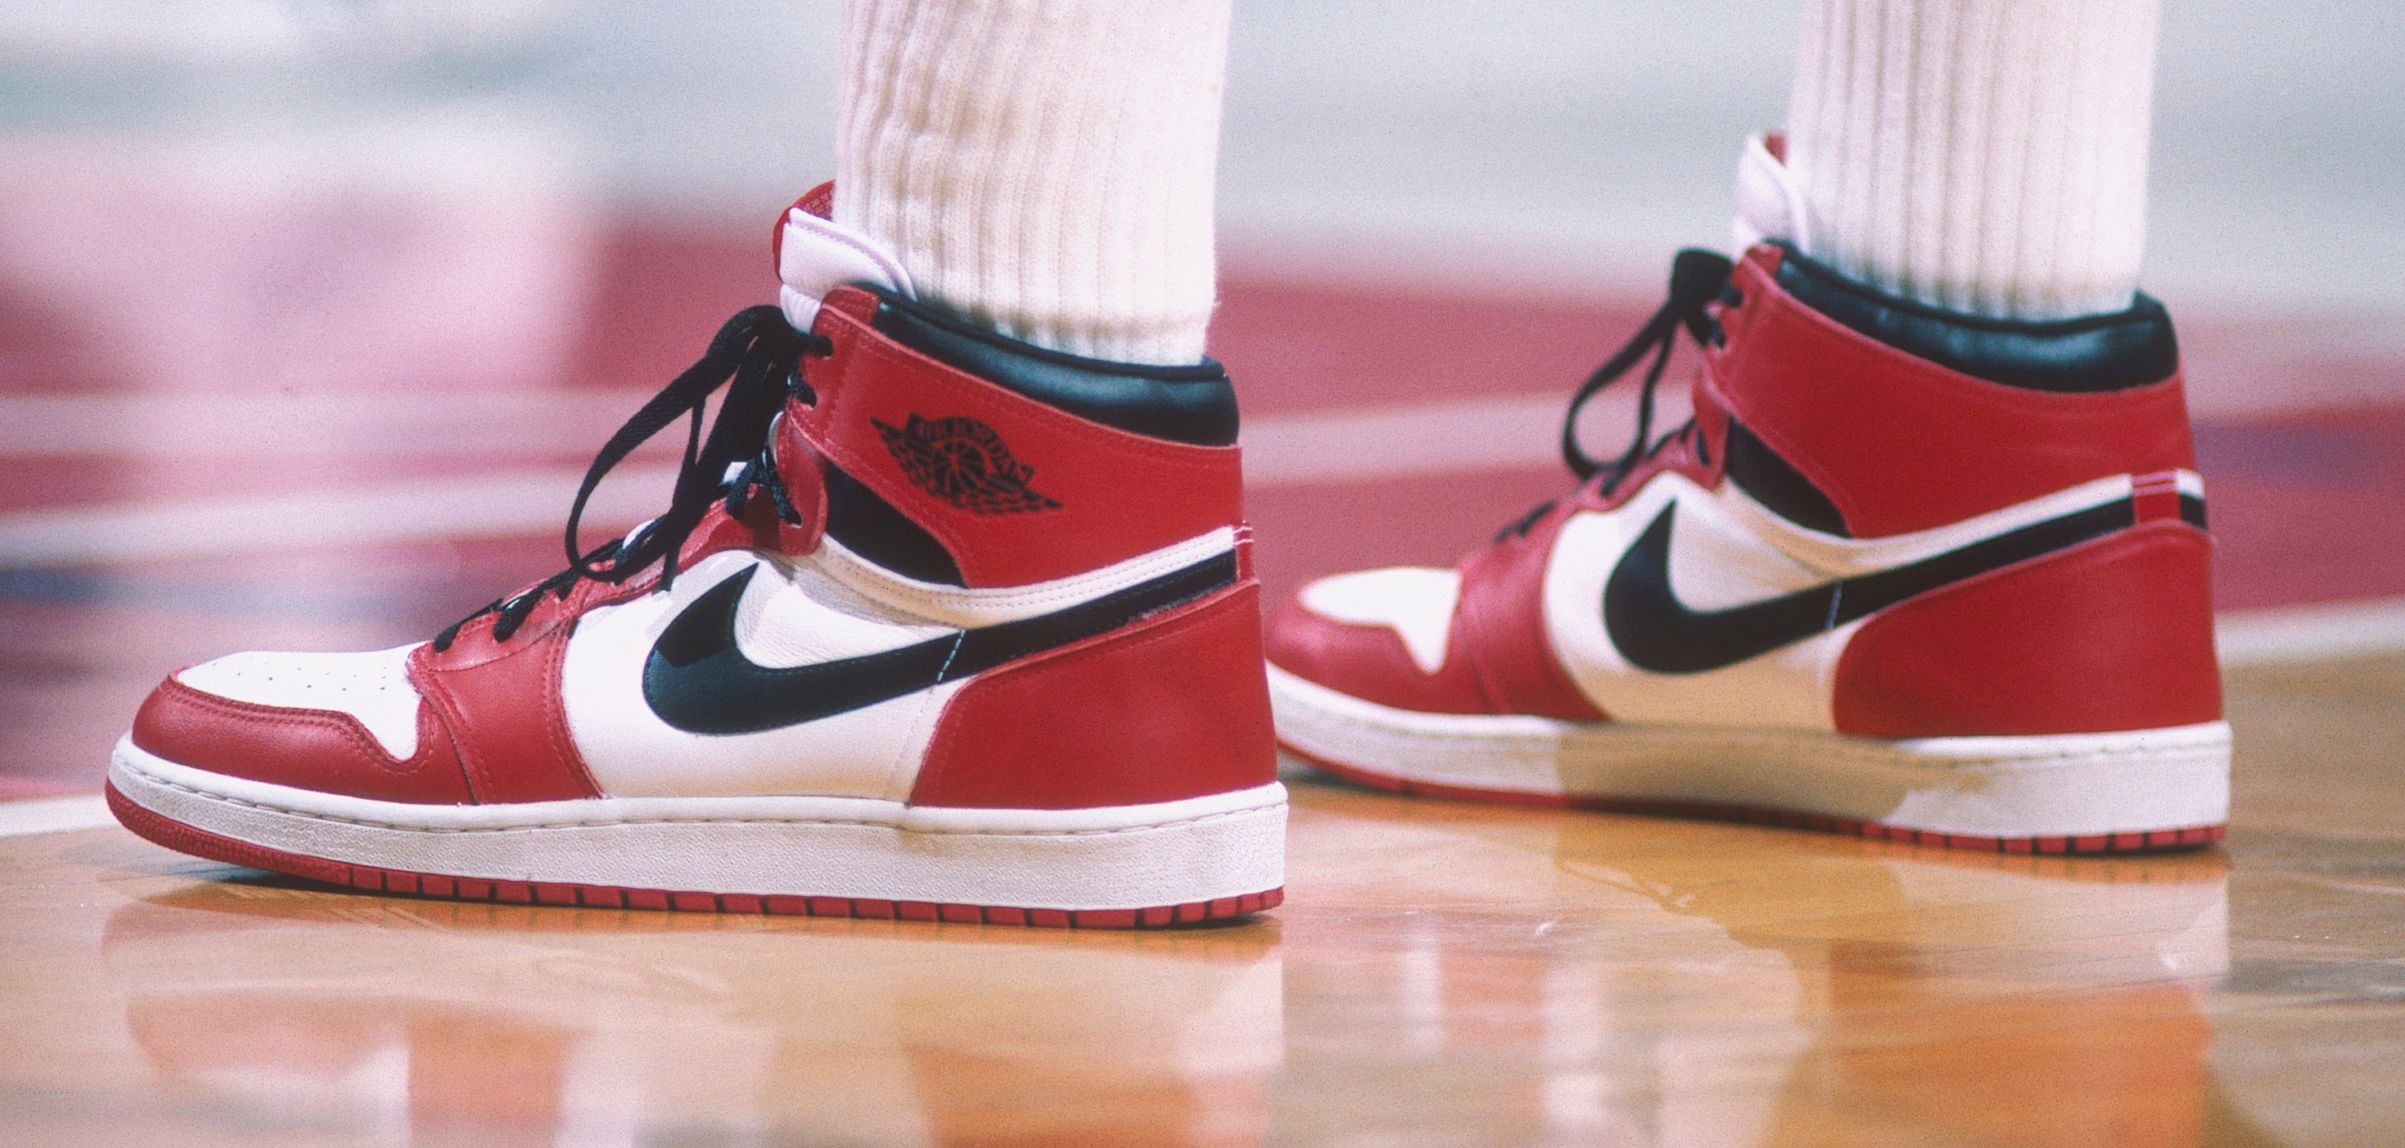 How One of the Most Iconic Sneakers in History Almost Didn't Happen